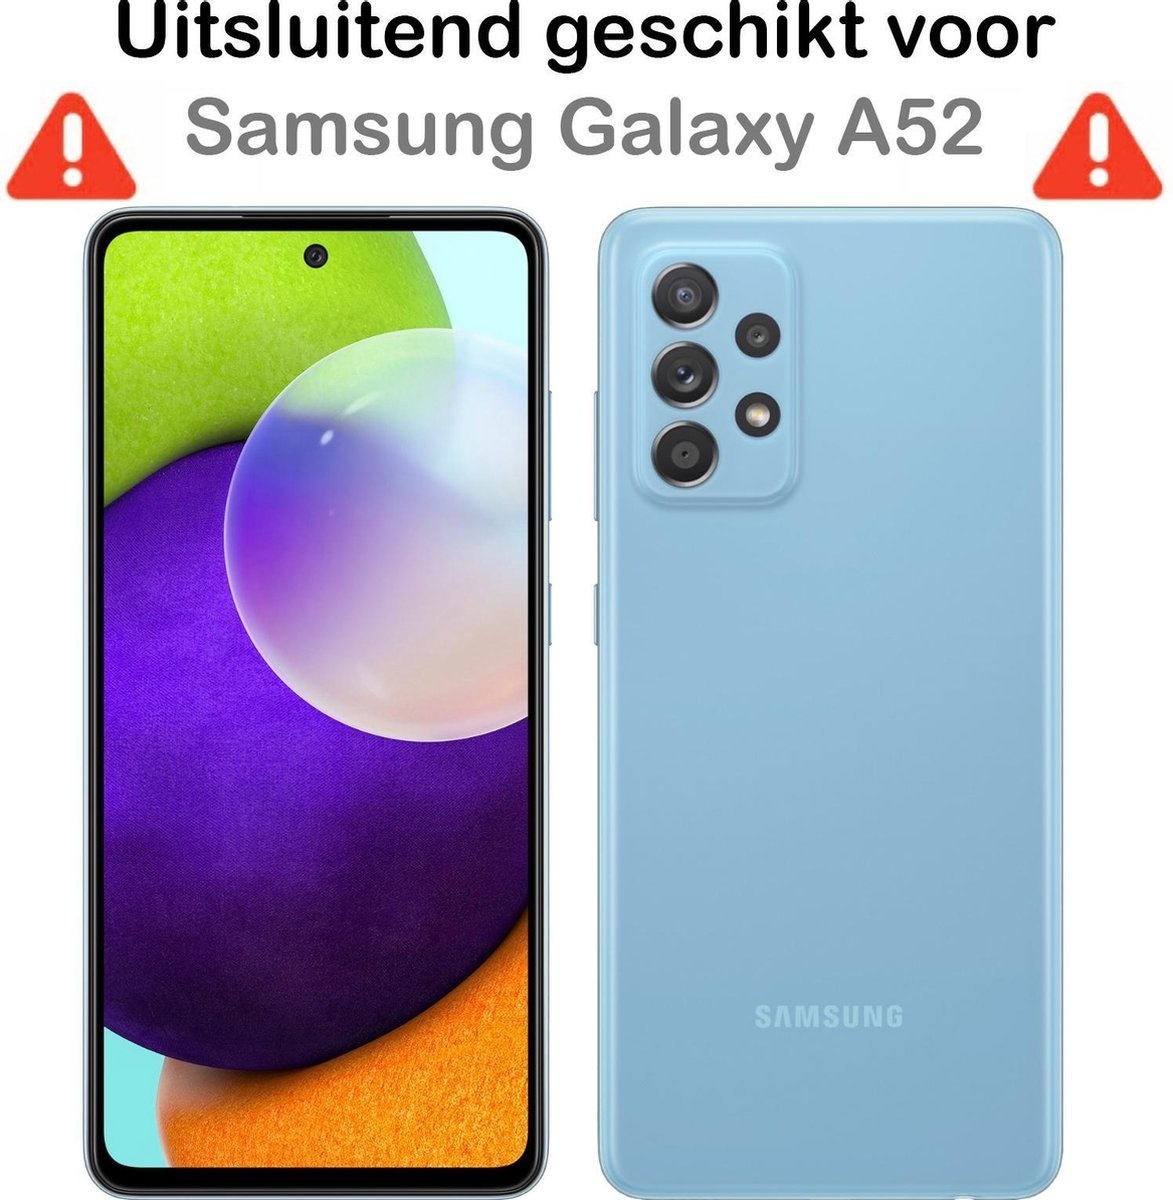 Samsung Galaxy A52s Hoesje Shock Proof Case - Samsung Galaxy A52s Case Zwart Shock Hoes - Samsung Galaxy A52s Hoes Cover - Zwart